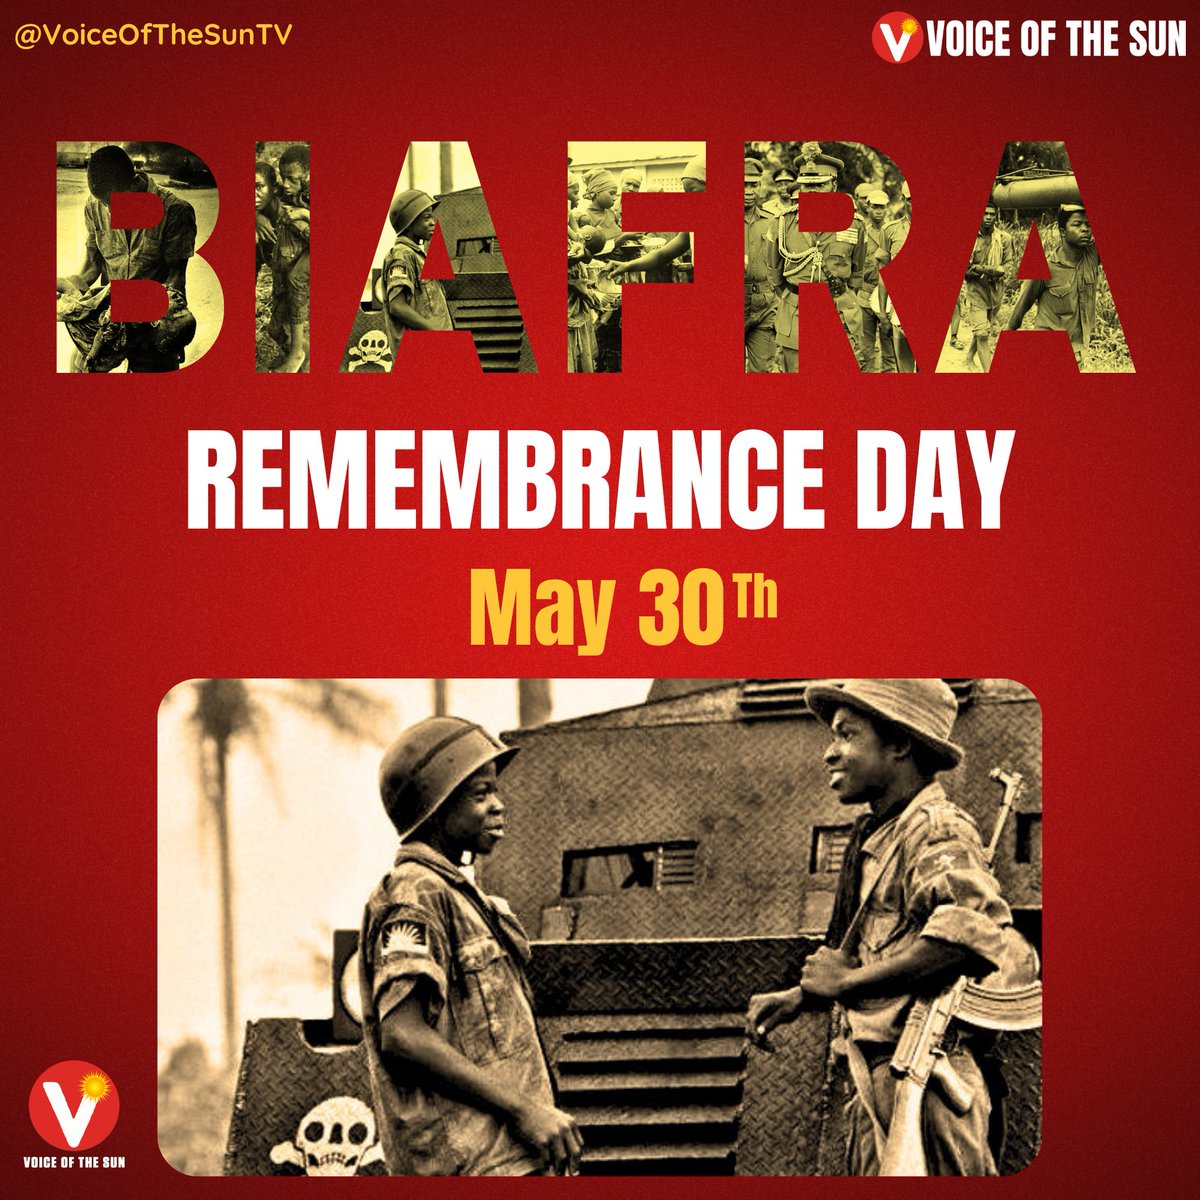 And boys became hardened MEN. For one sole purpose - to preserve fless, blood and Land, for the next generation. 

#BiafraHeroesDay2023 #BiafraFallenHeroesDay
#BiafraRembranceDay